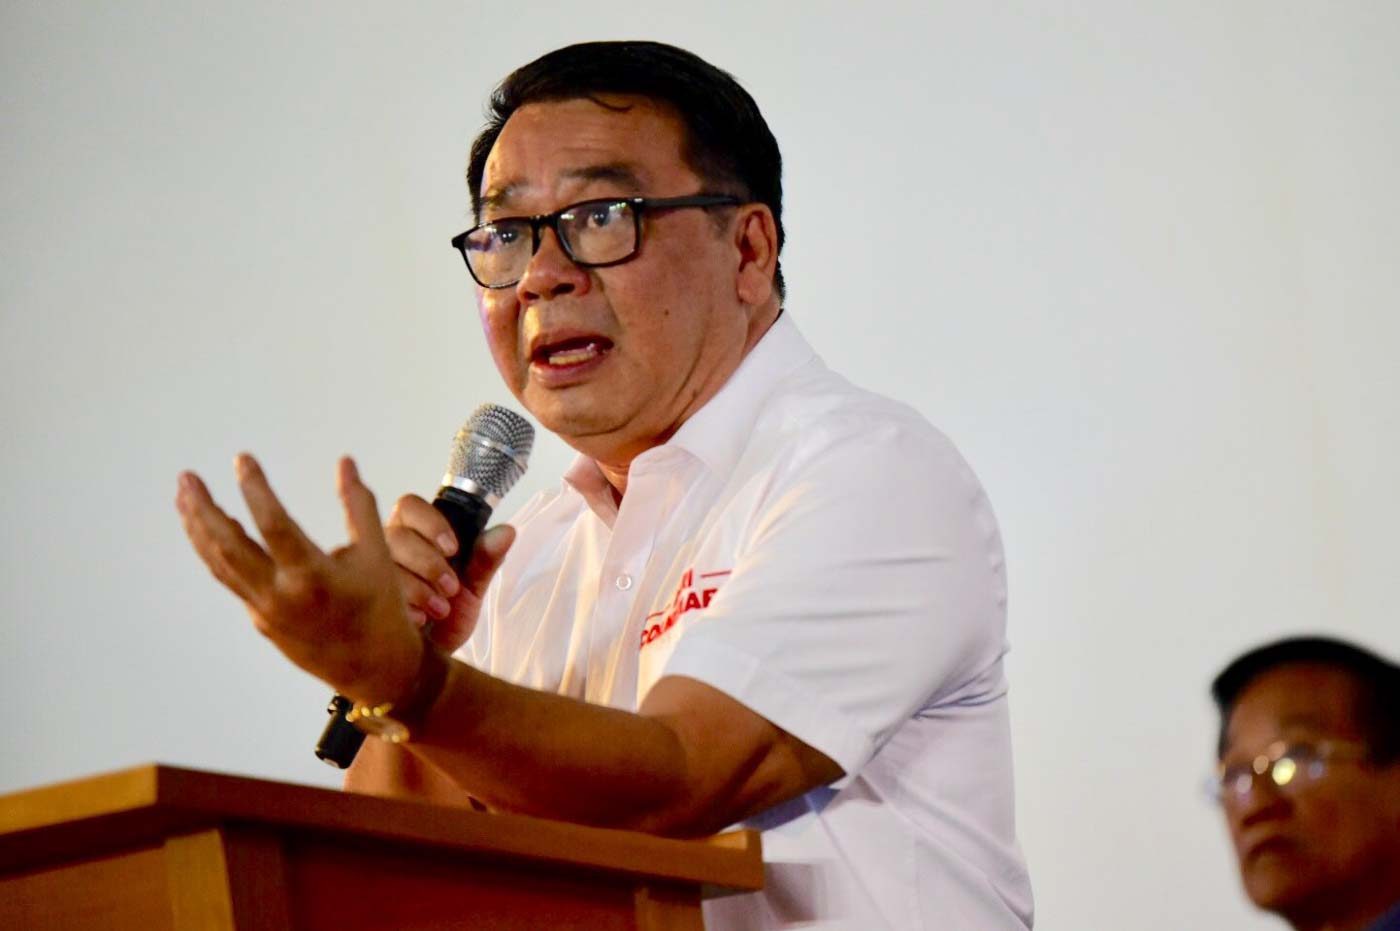 Colmenares defends Makabayan pick of reelectionists over labor bets